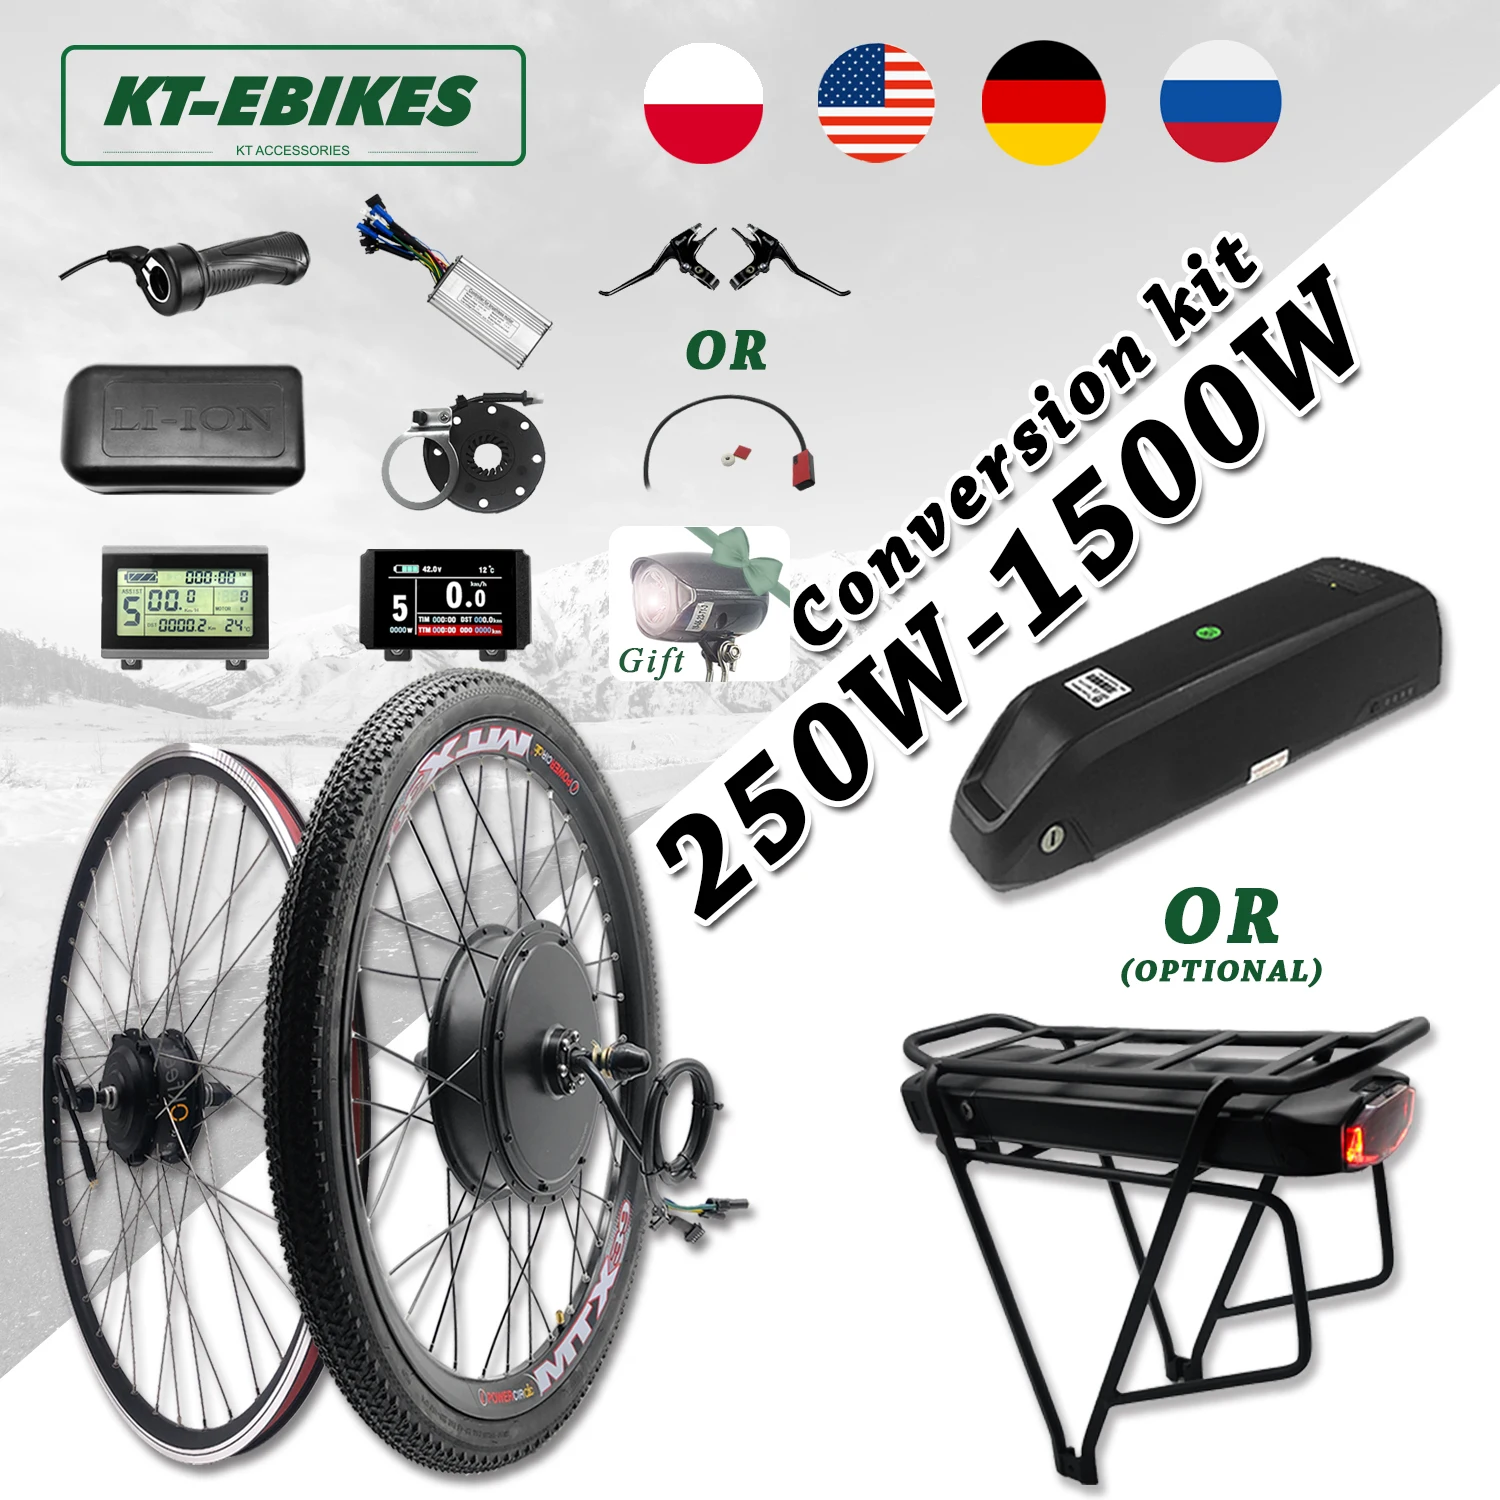 

eBike Kit 36V 500W 48V 750W 1000W 1500W Front Rear e-bike Wheel Hub Motor Electric Bicycle Bike Conversion Kit with battery